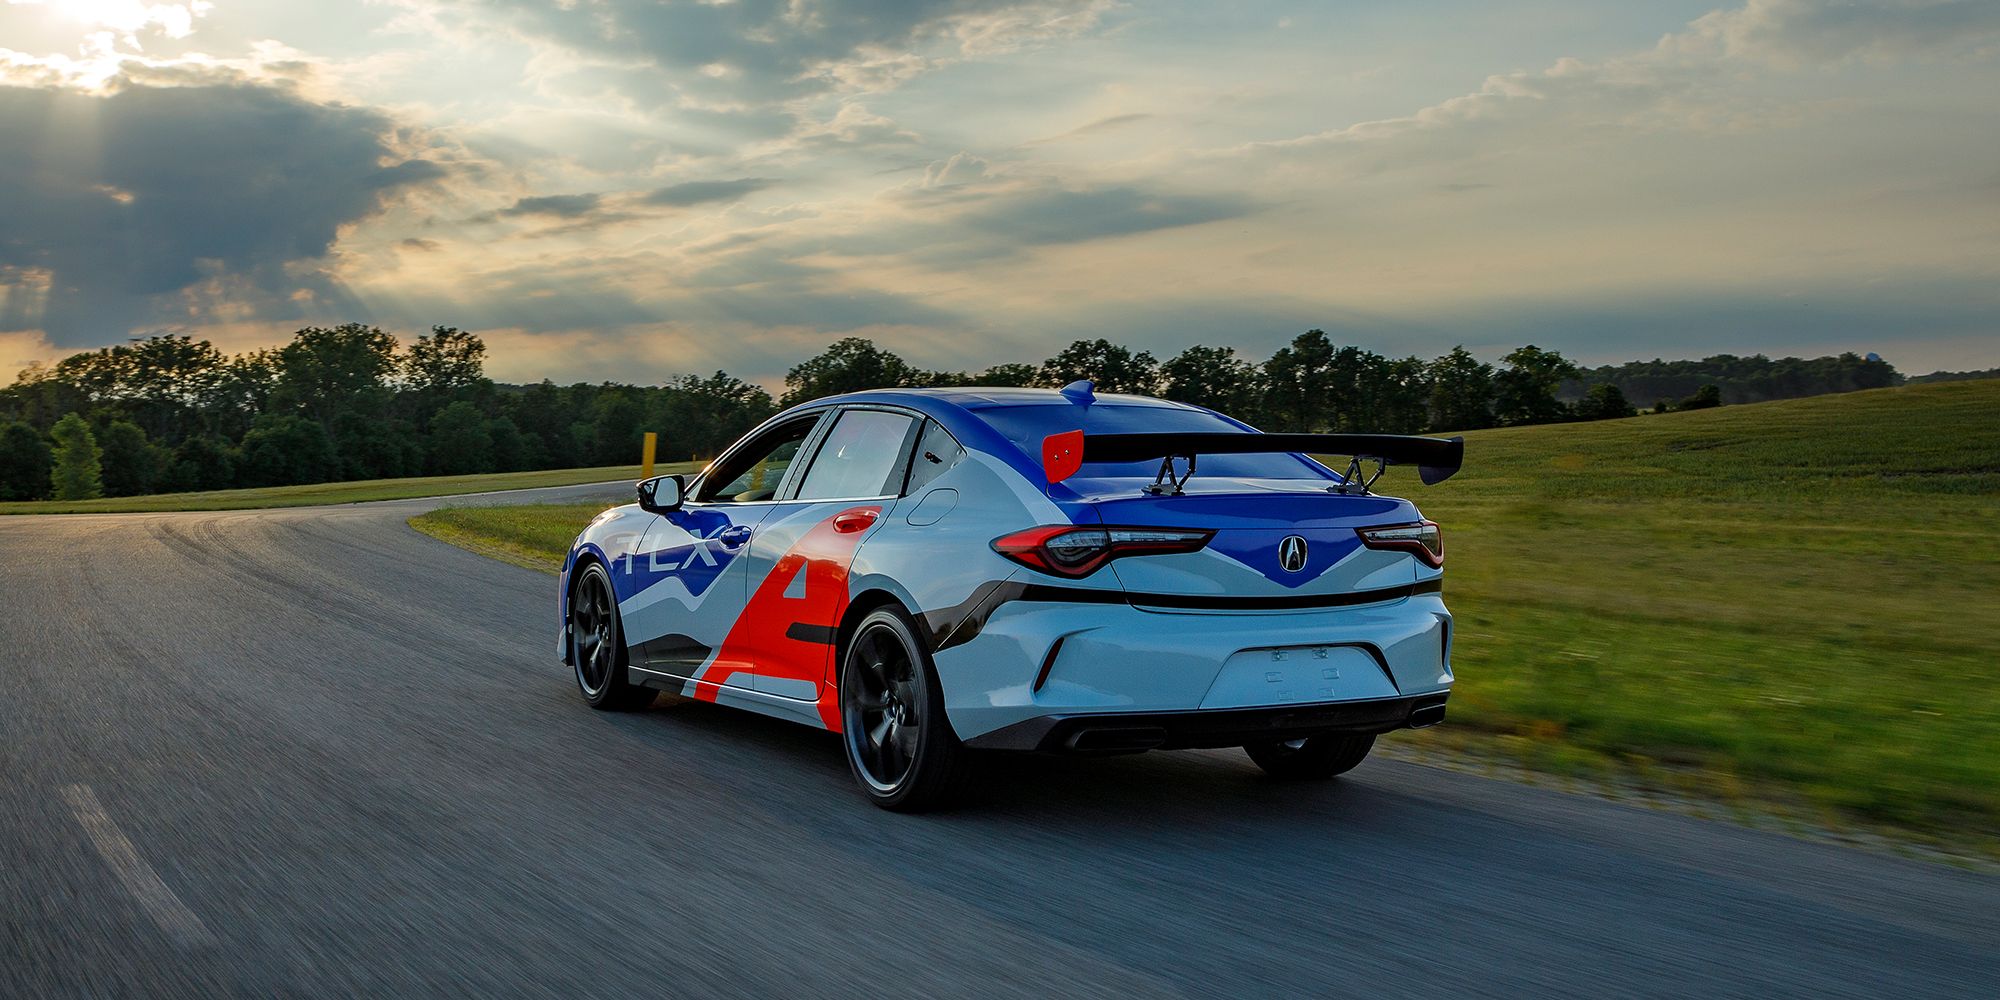 The rear of the TLX's race version